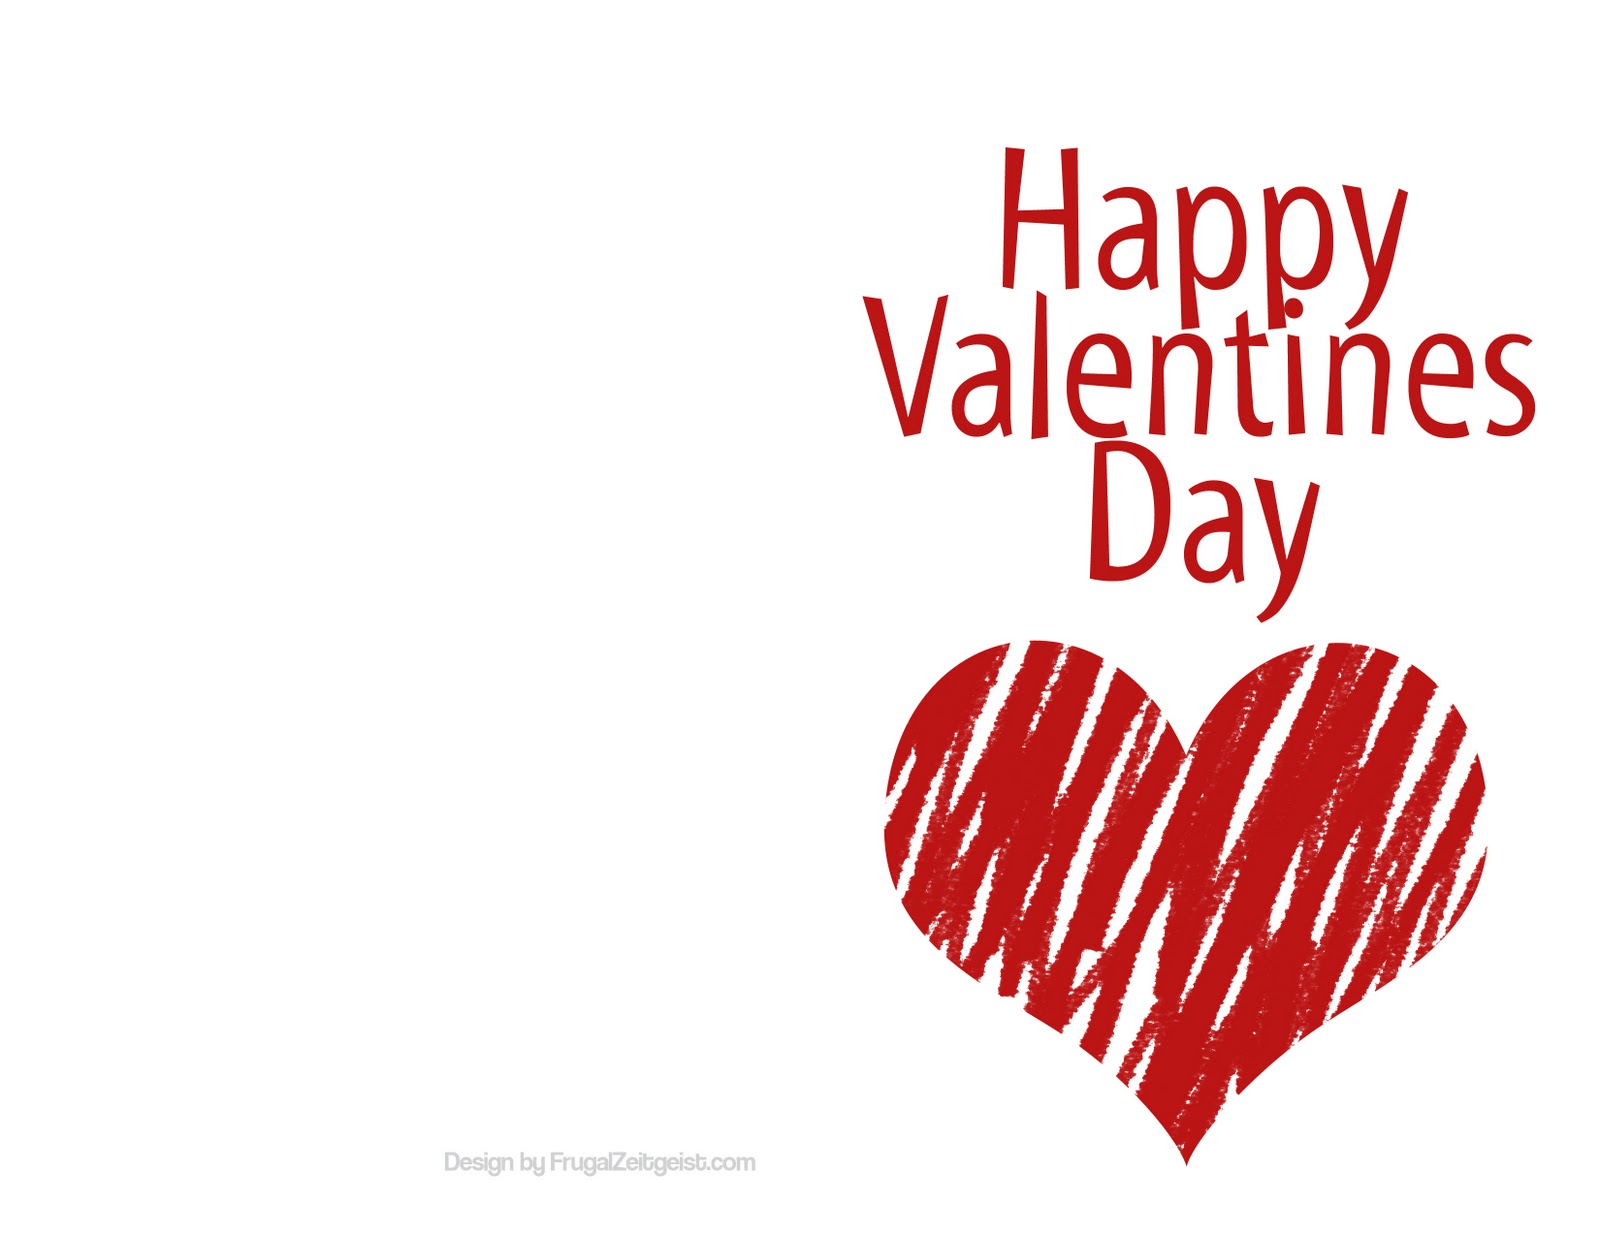 01 Birthday Wishes: The Valentine's Day Card - What is It's History?